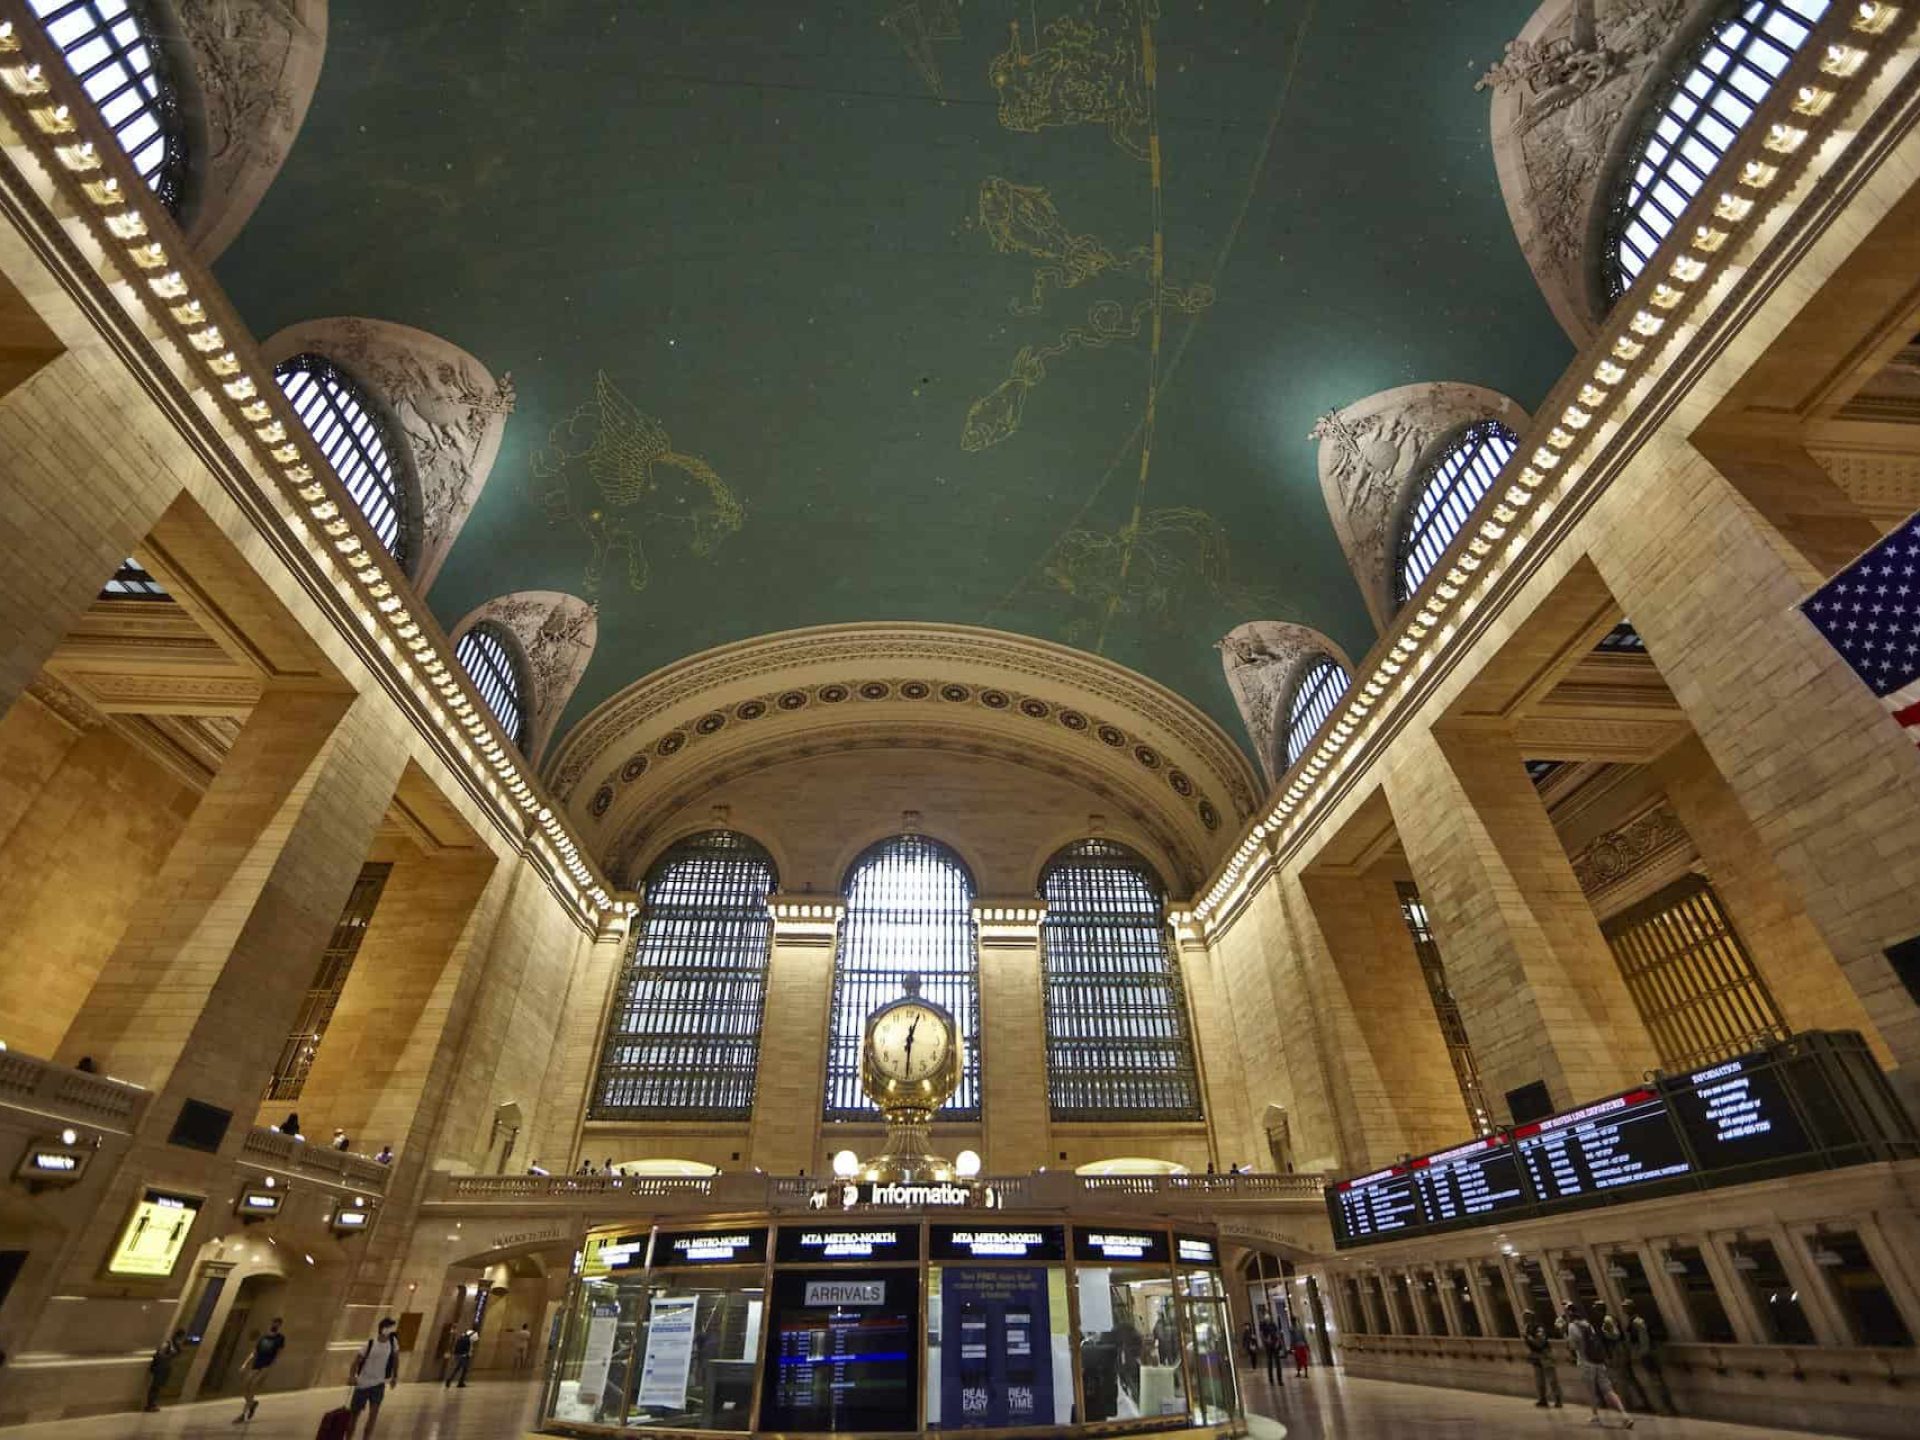 Inside the Grand Central Terminal looking up at the ceiling which depicts the winter sky with constellation figures.